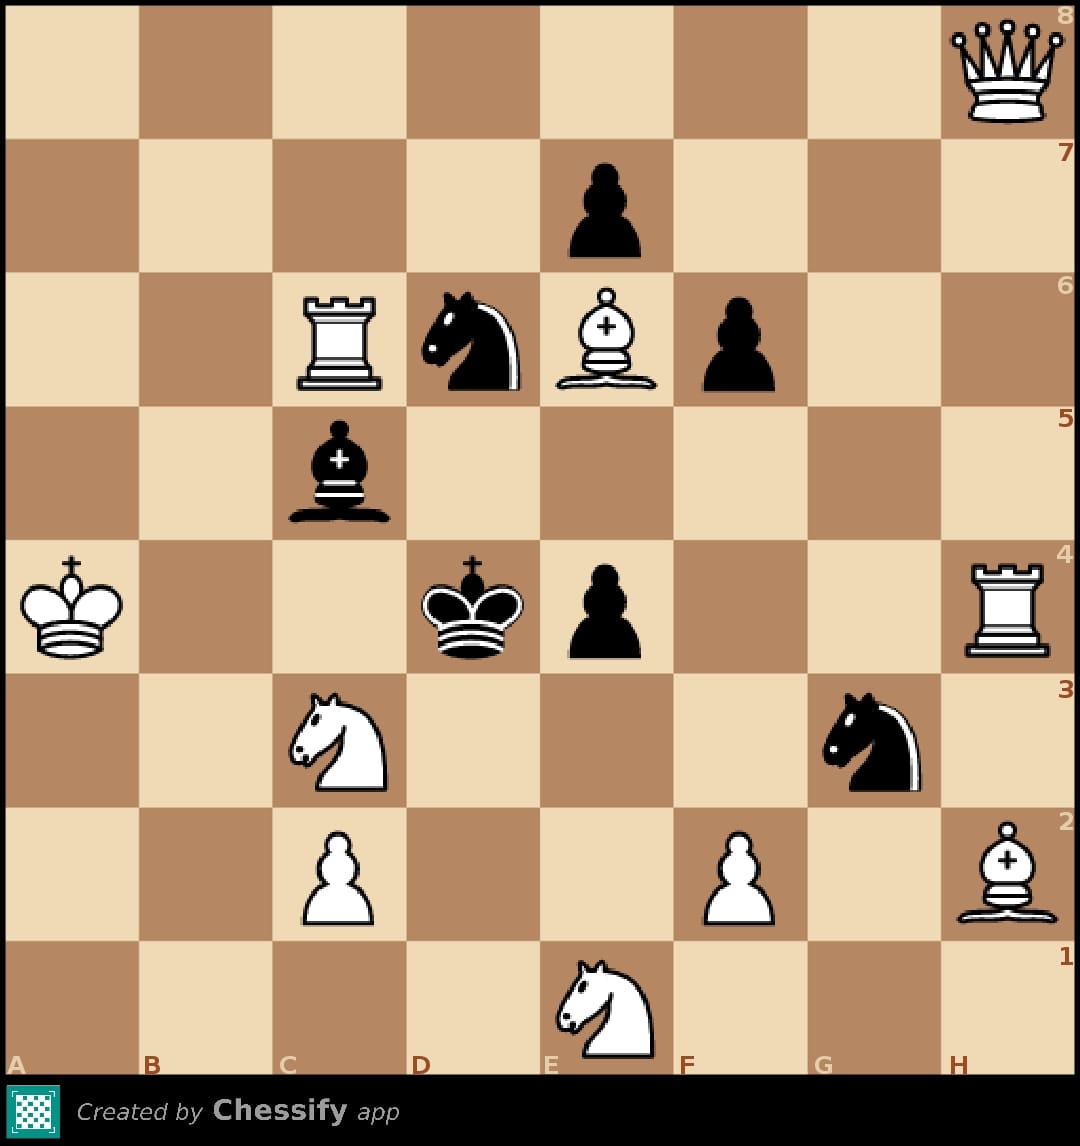 White to play. Mate in 2 moves. Can you find the solution? Comment